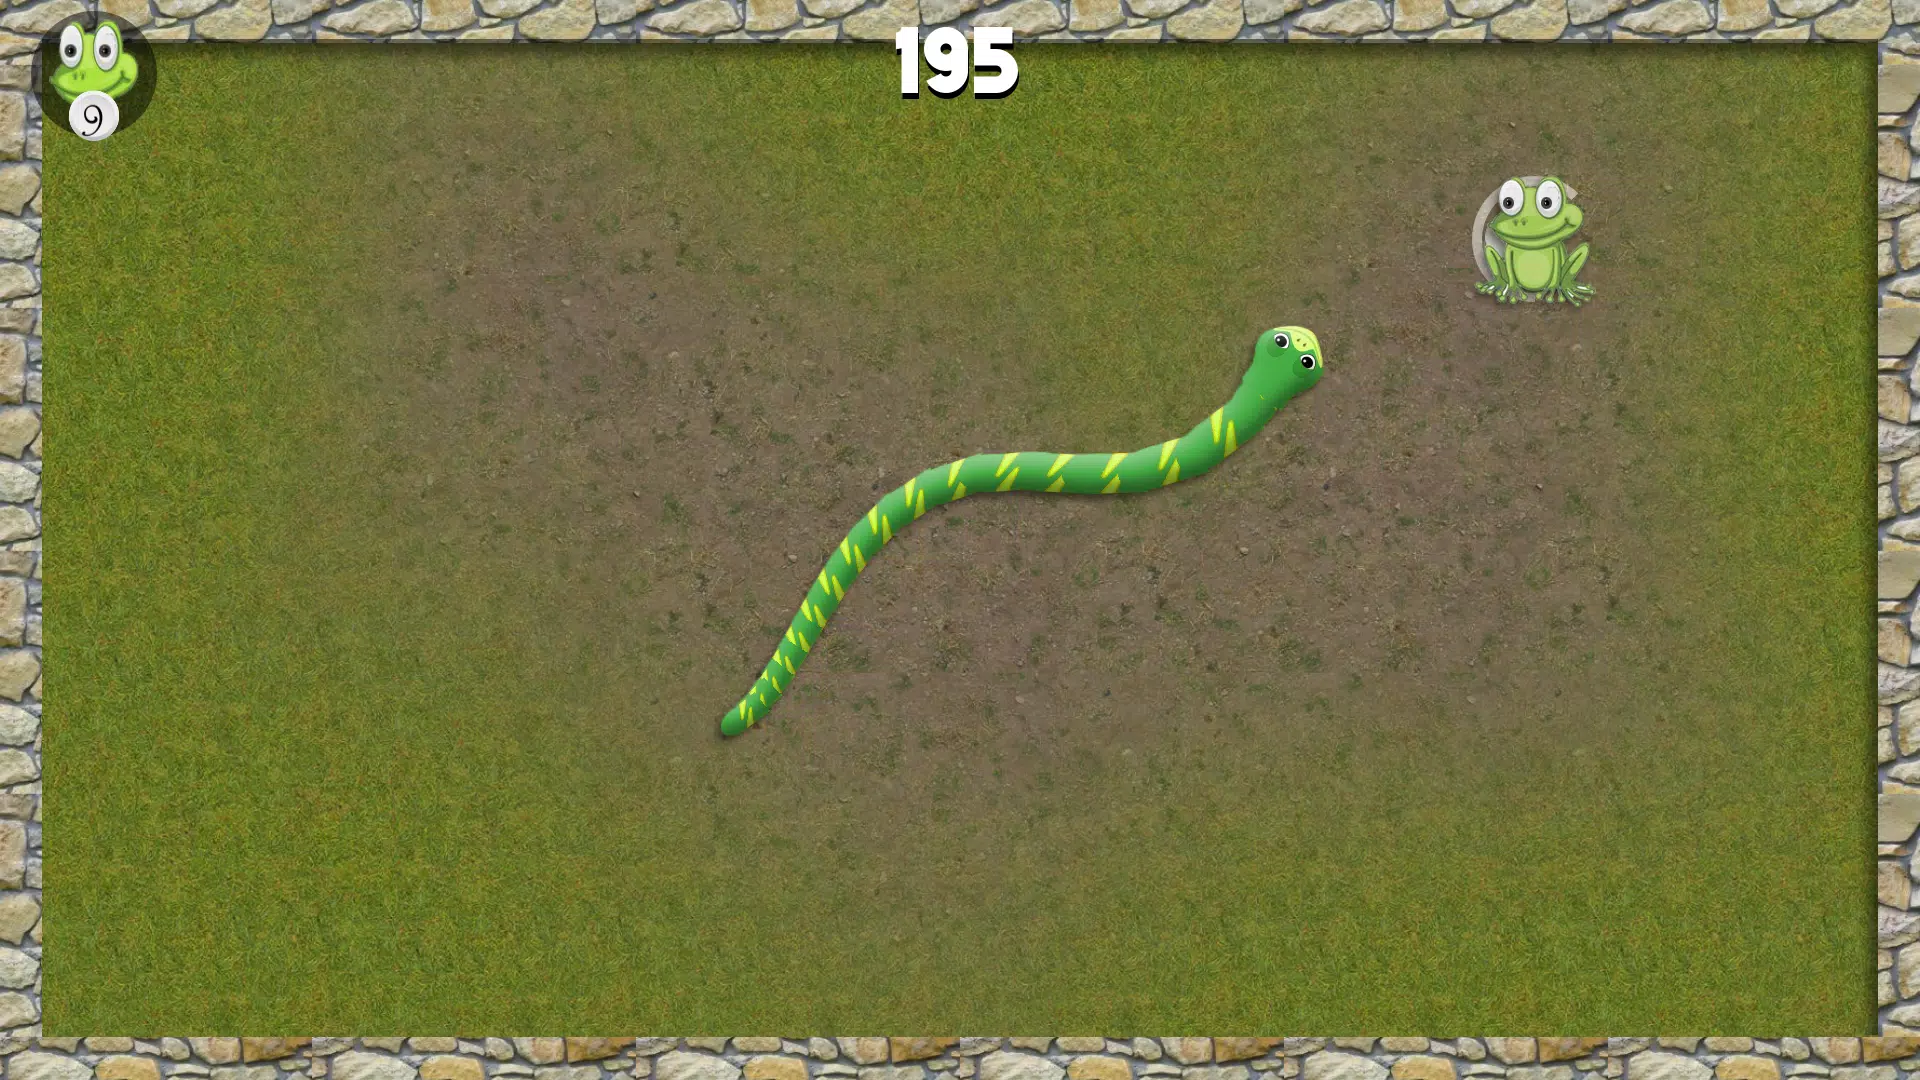 Snake Classic - The Snake Game Apk Download for Android- Latest